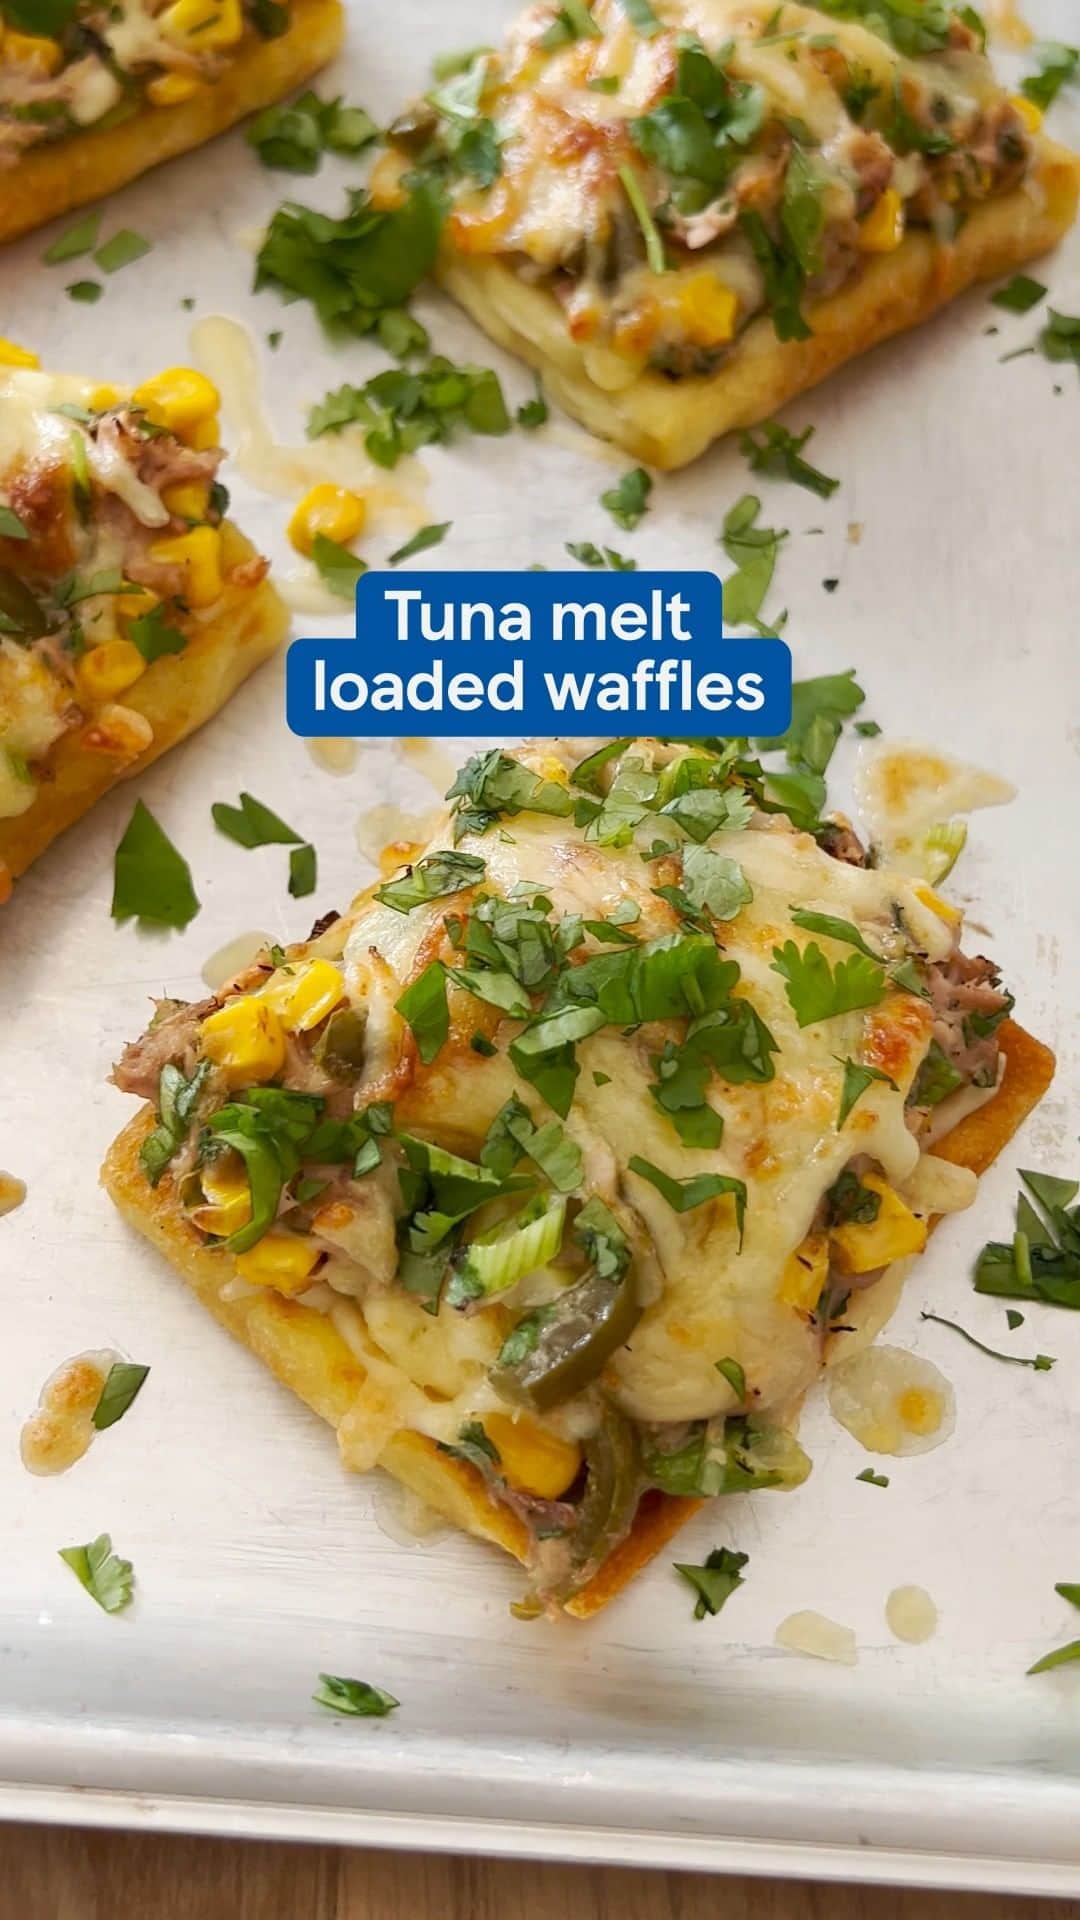 Tesco Food Officialのインスタグラム：「Who says waffles are a just a side? These fully loaded tuna melt waffles are giving main character energy. Take note from @novicekitchen_ and head to the link in bio for the recipe that’s perfect for a speedy lunch or dinner.」